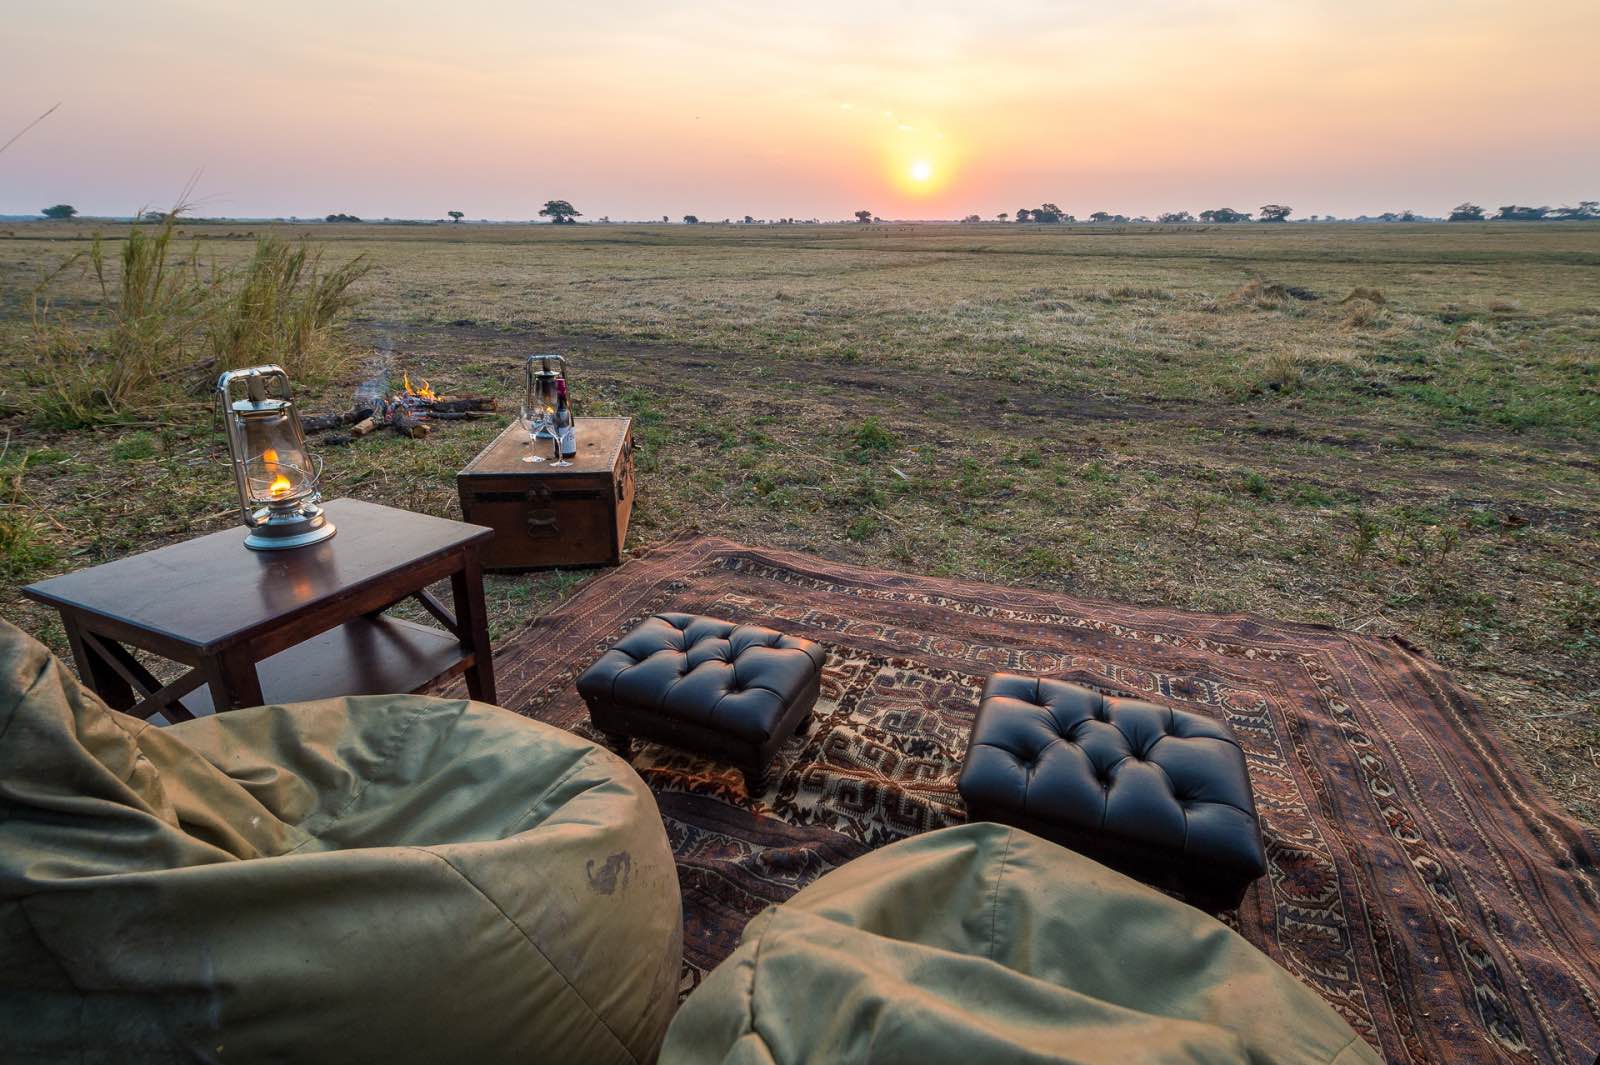 Total relaxation enjoying the sunset overlooking the floodplains at Shumba Camp